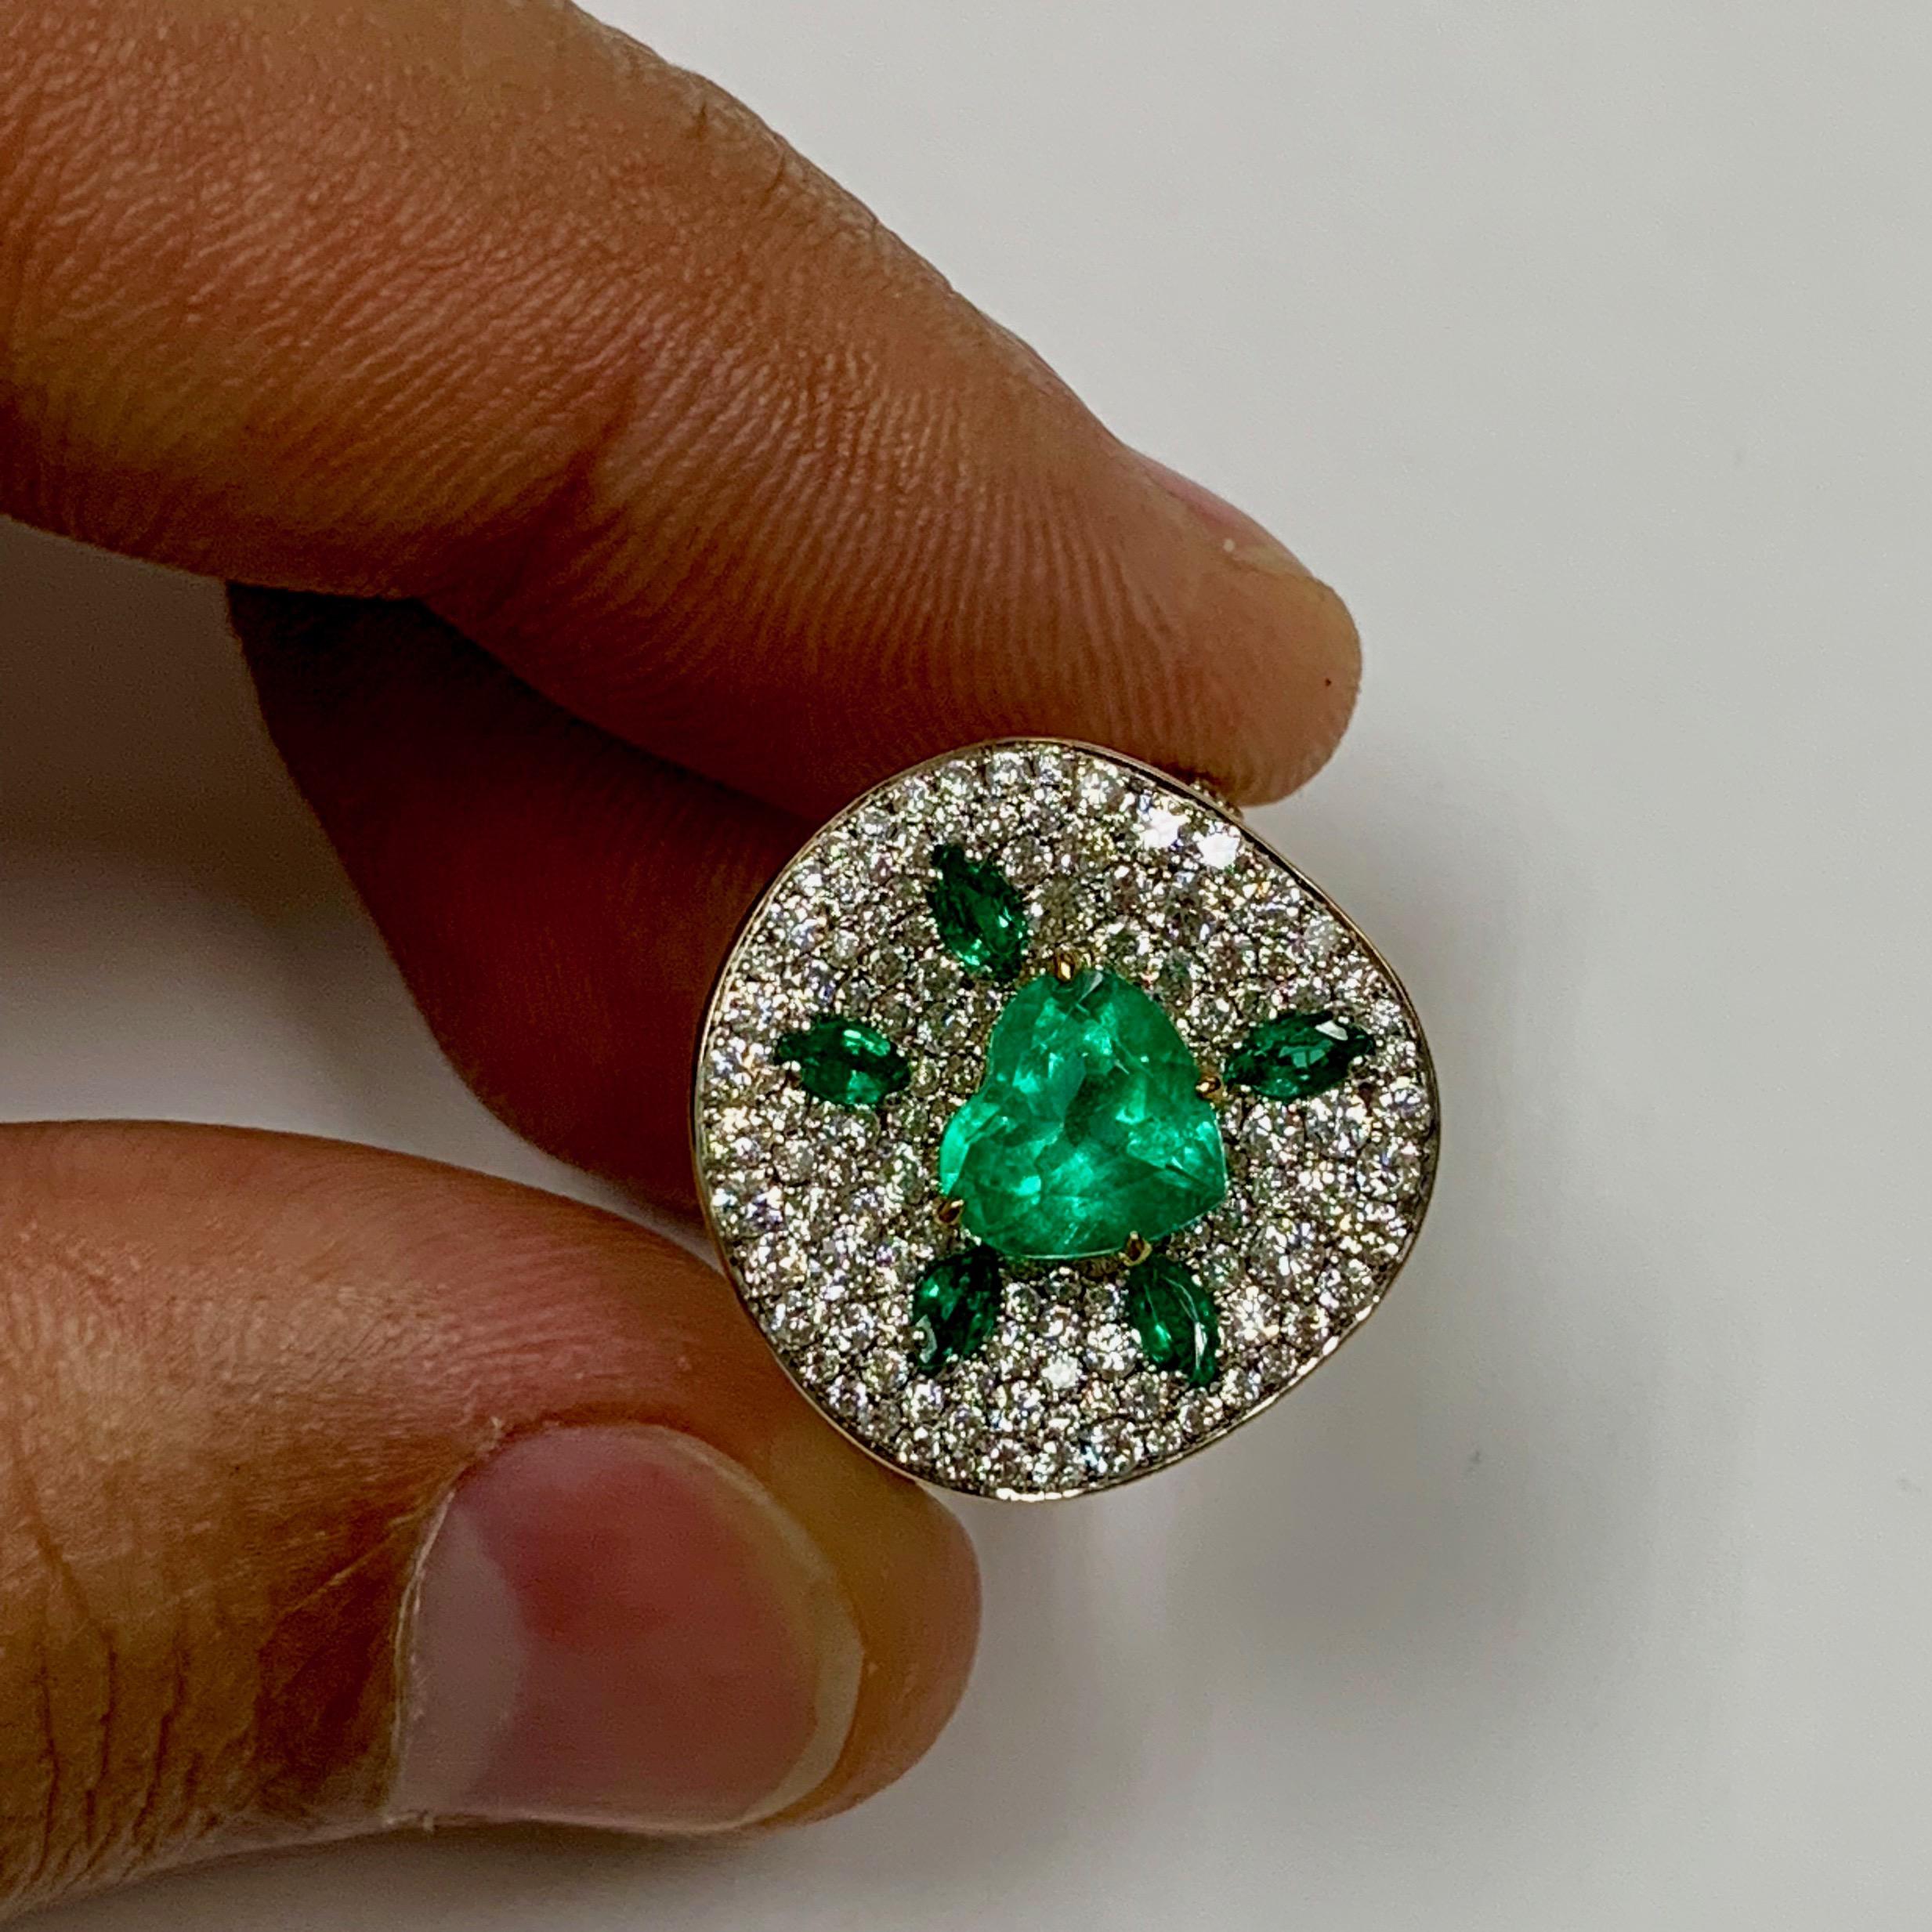 Colombian Emerald Diamond 18 Karat Yellow Gold Ring 
Emeralds and diamonds - always winning combination. Here we support the central Colombian Emerald of 1,37 carat with 1,93 carat of pure White Diamonds. 
In set with Earrings